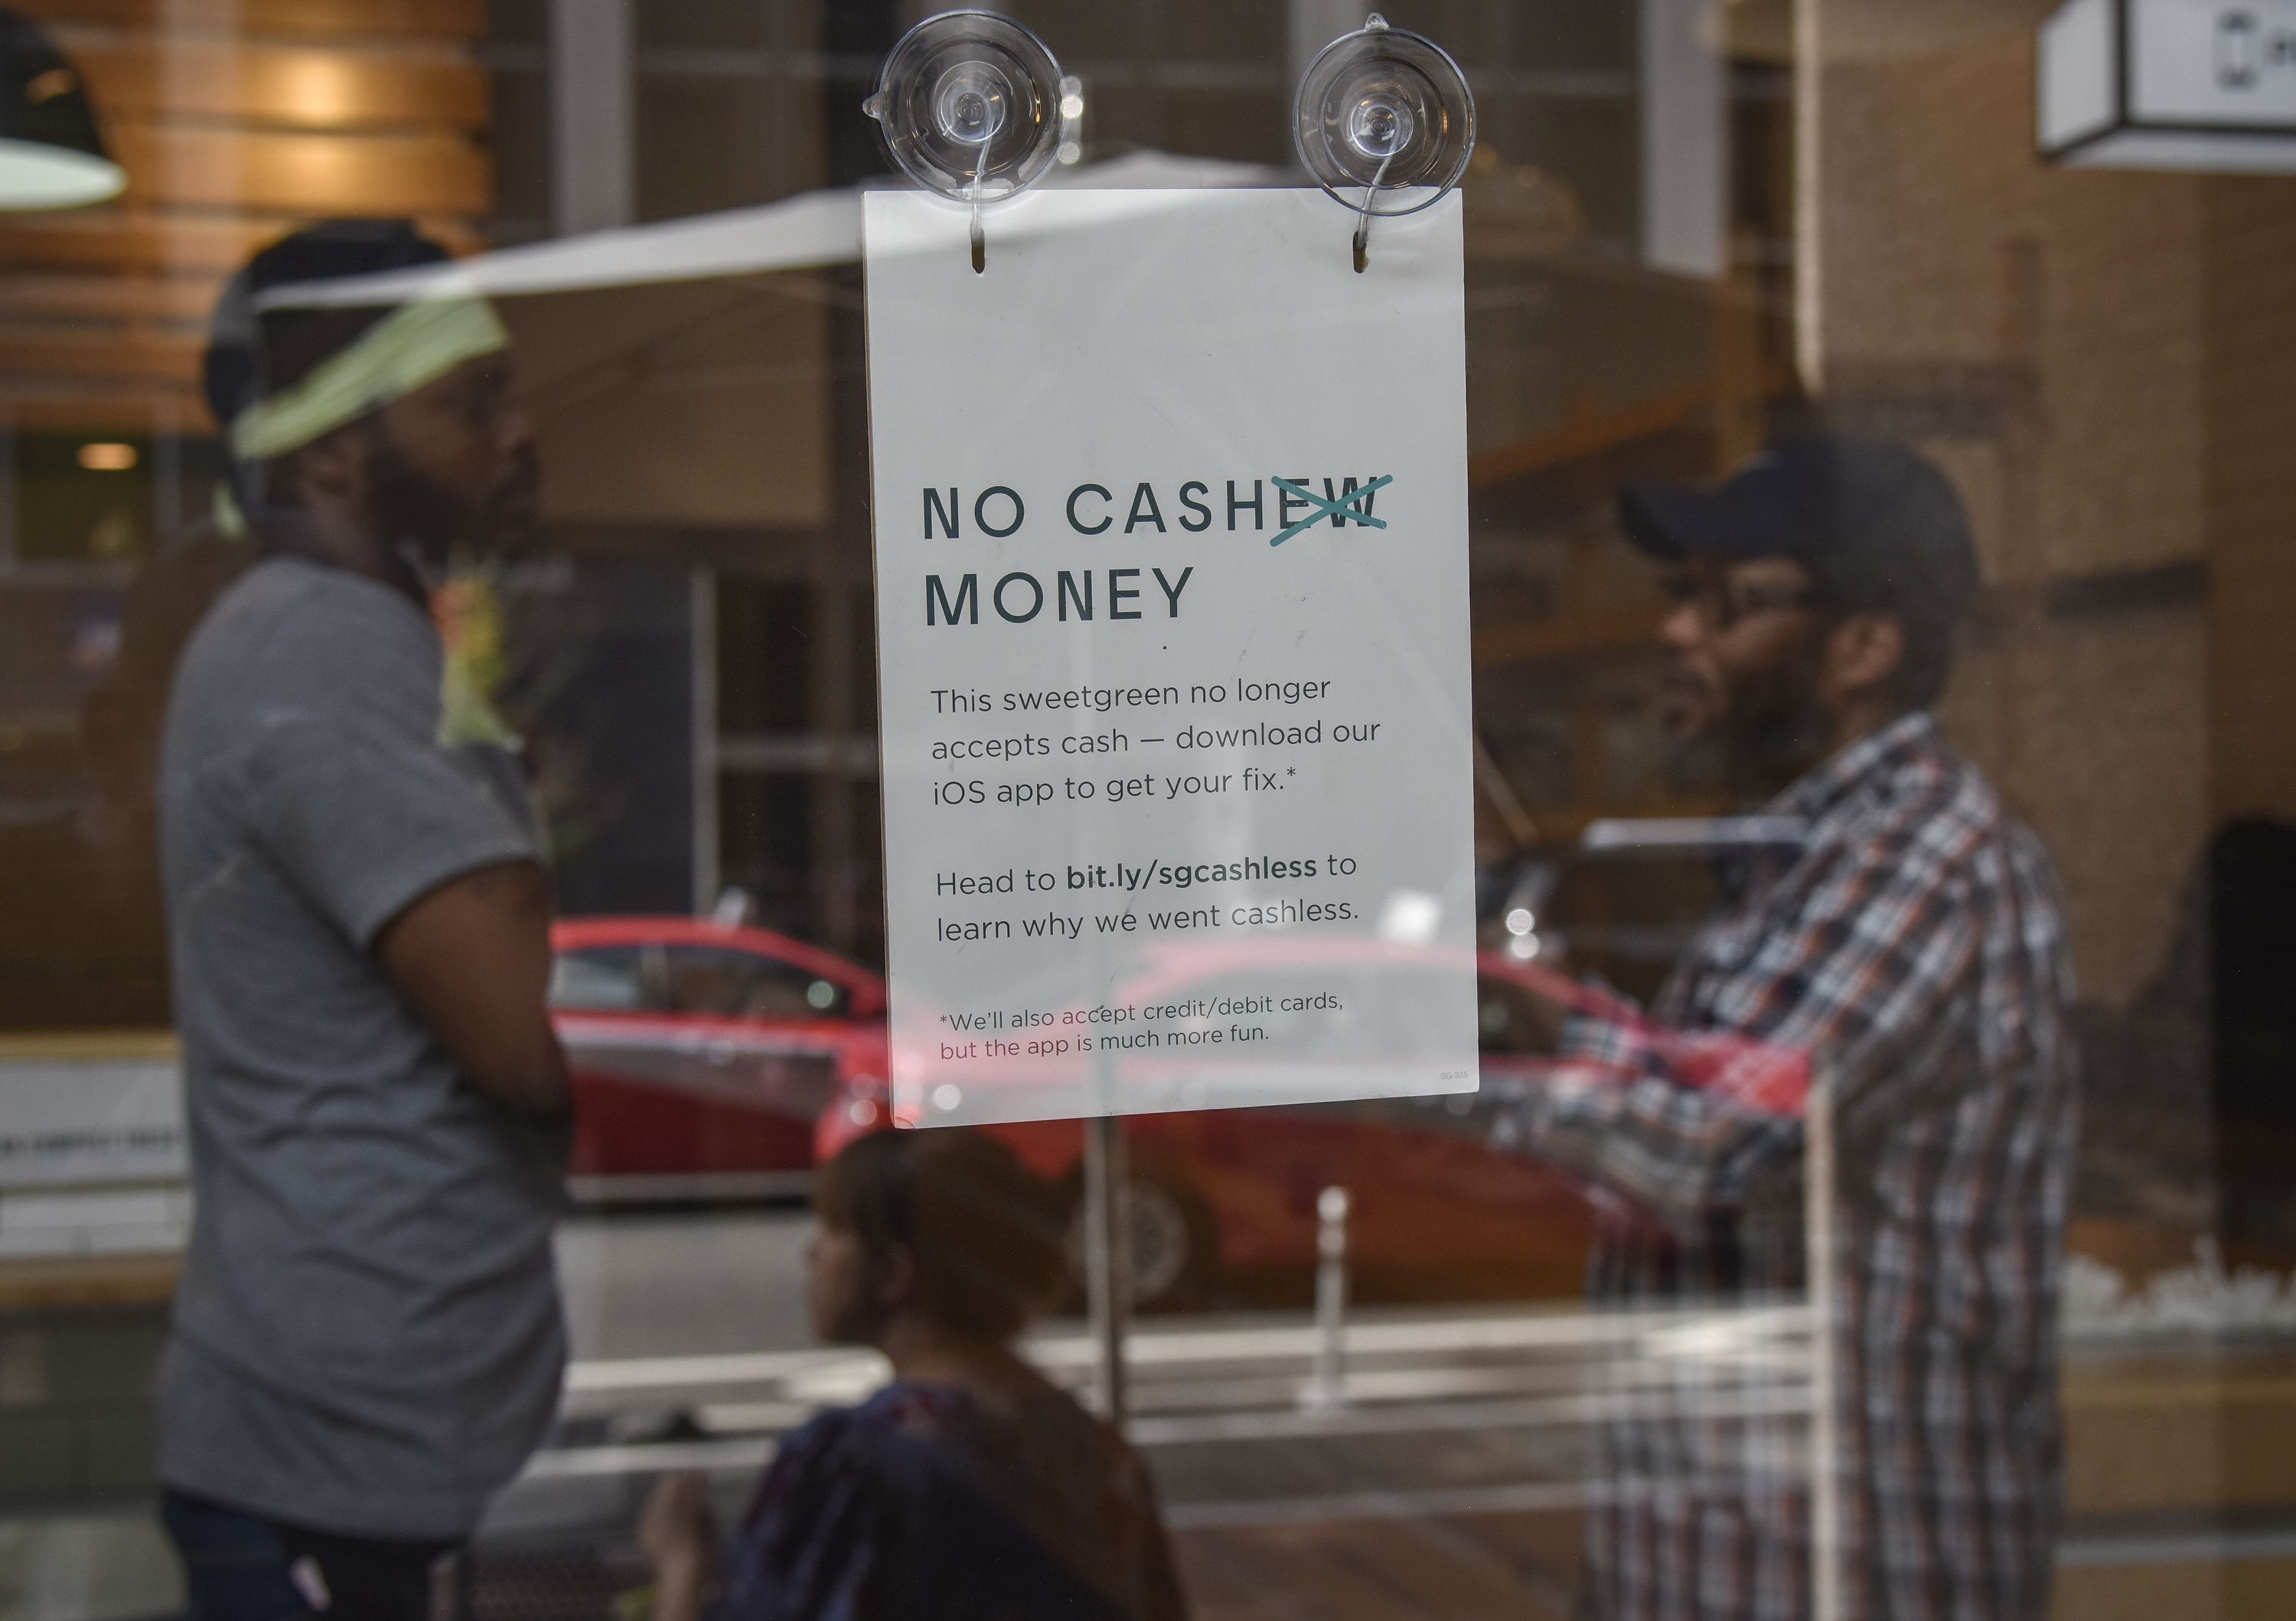 Retailers want to go cashless. But opponents say that's discriminatory